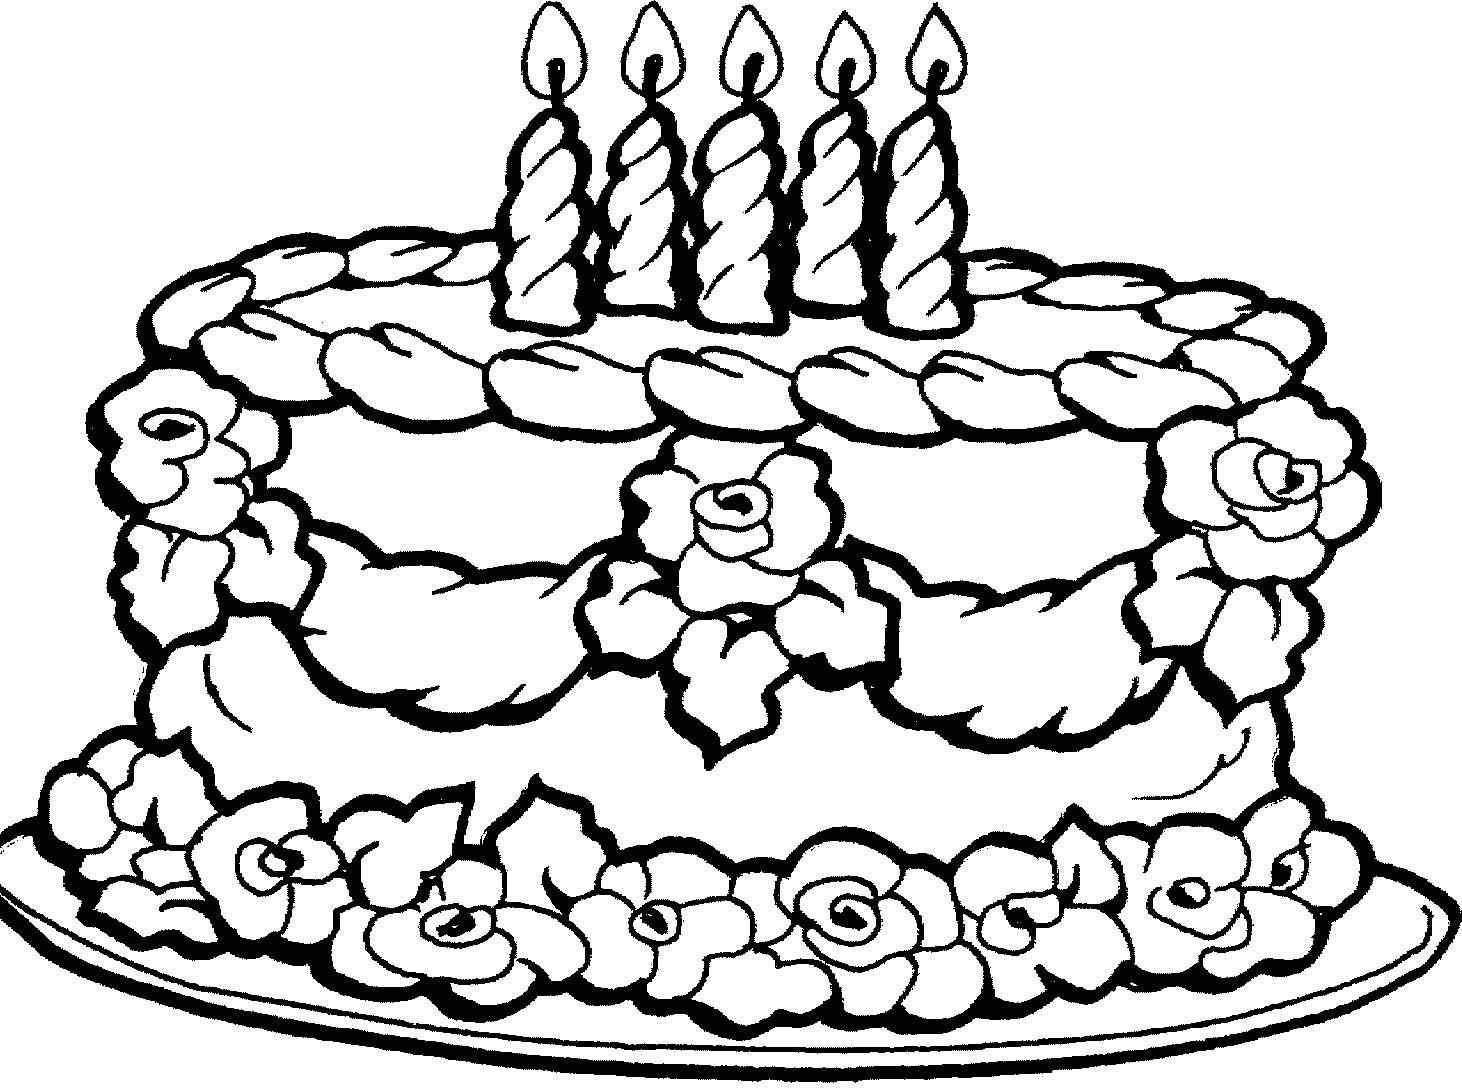 Cake coloring pages to download and print for free